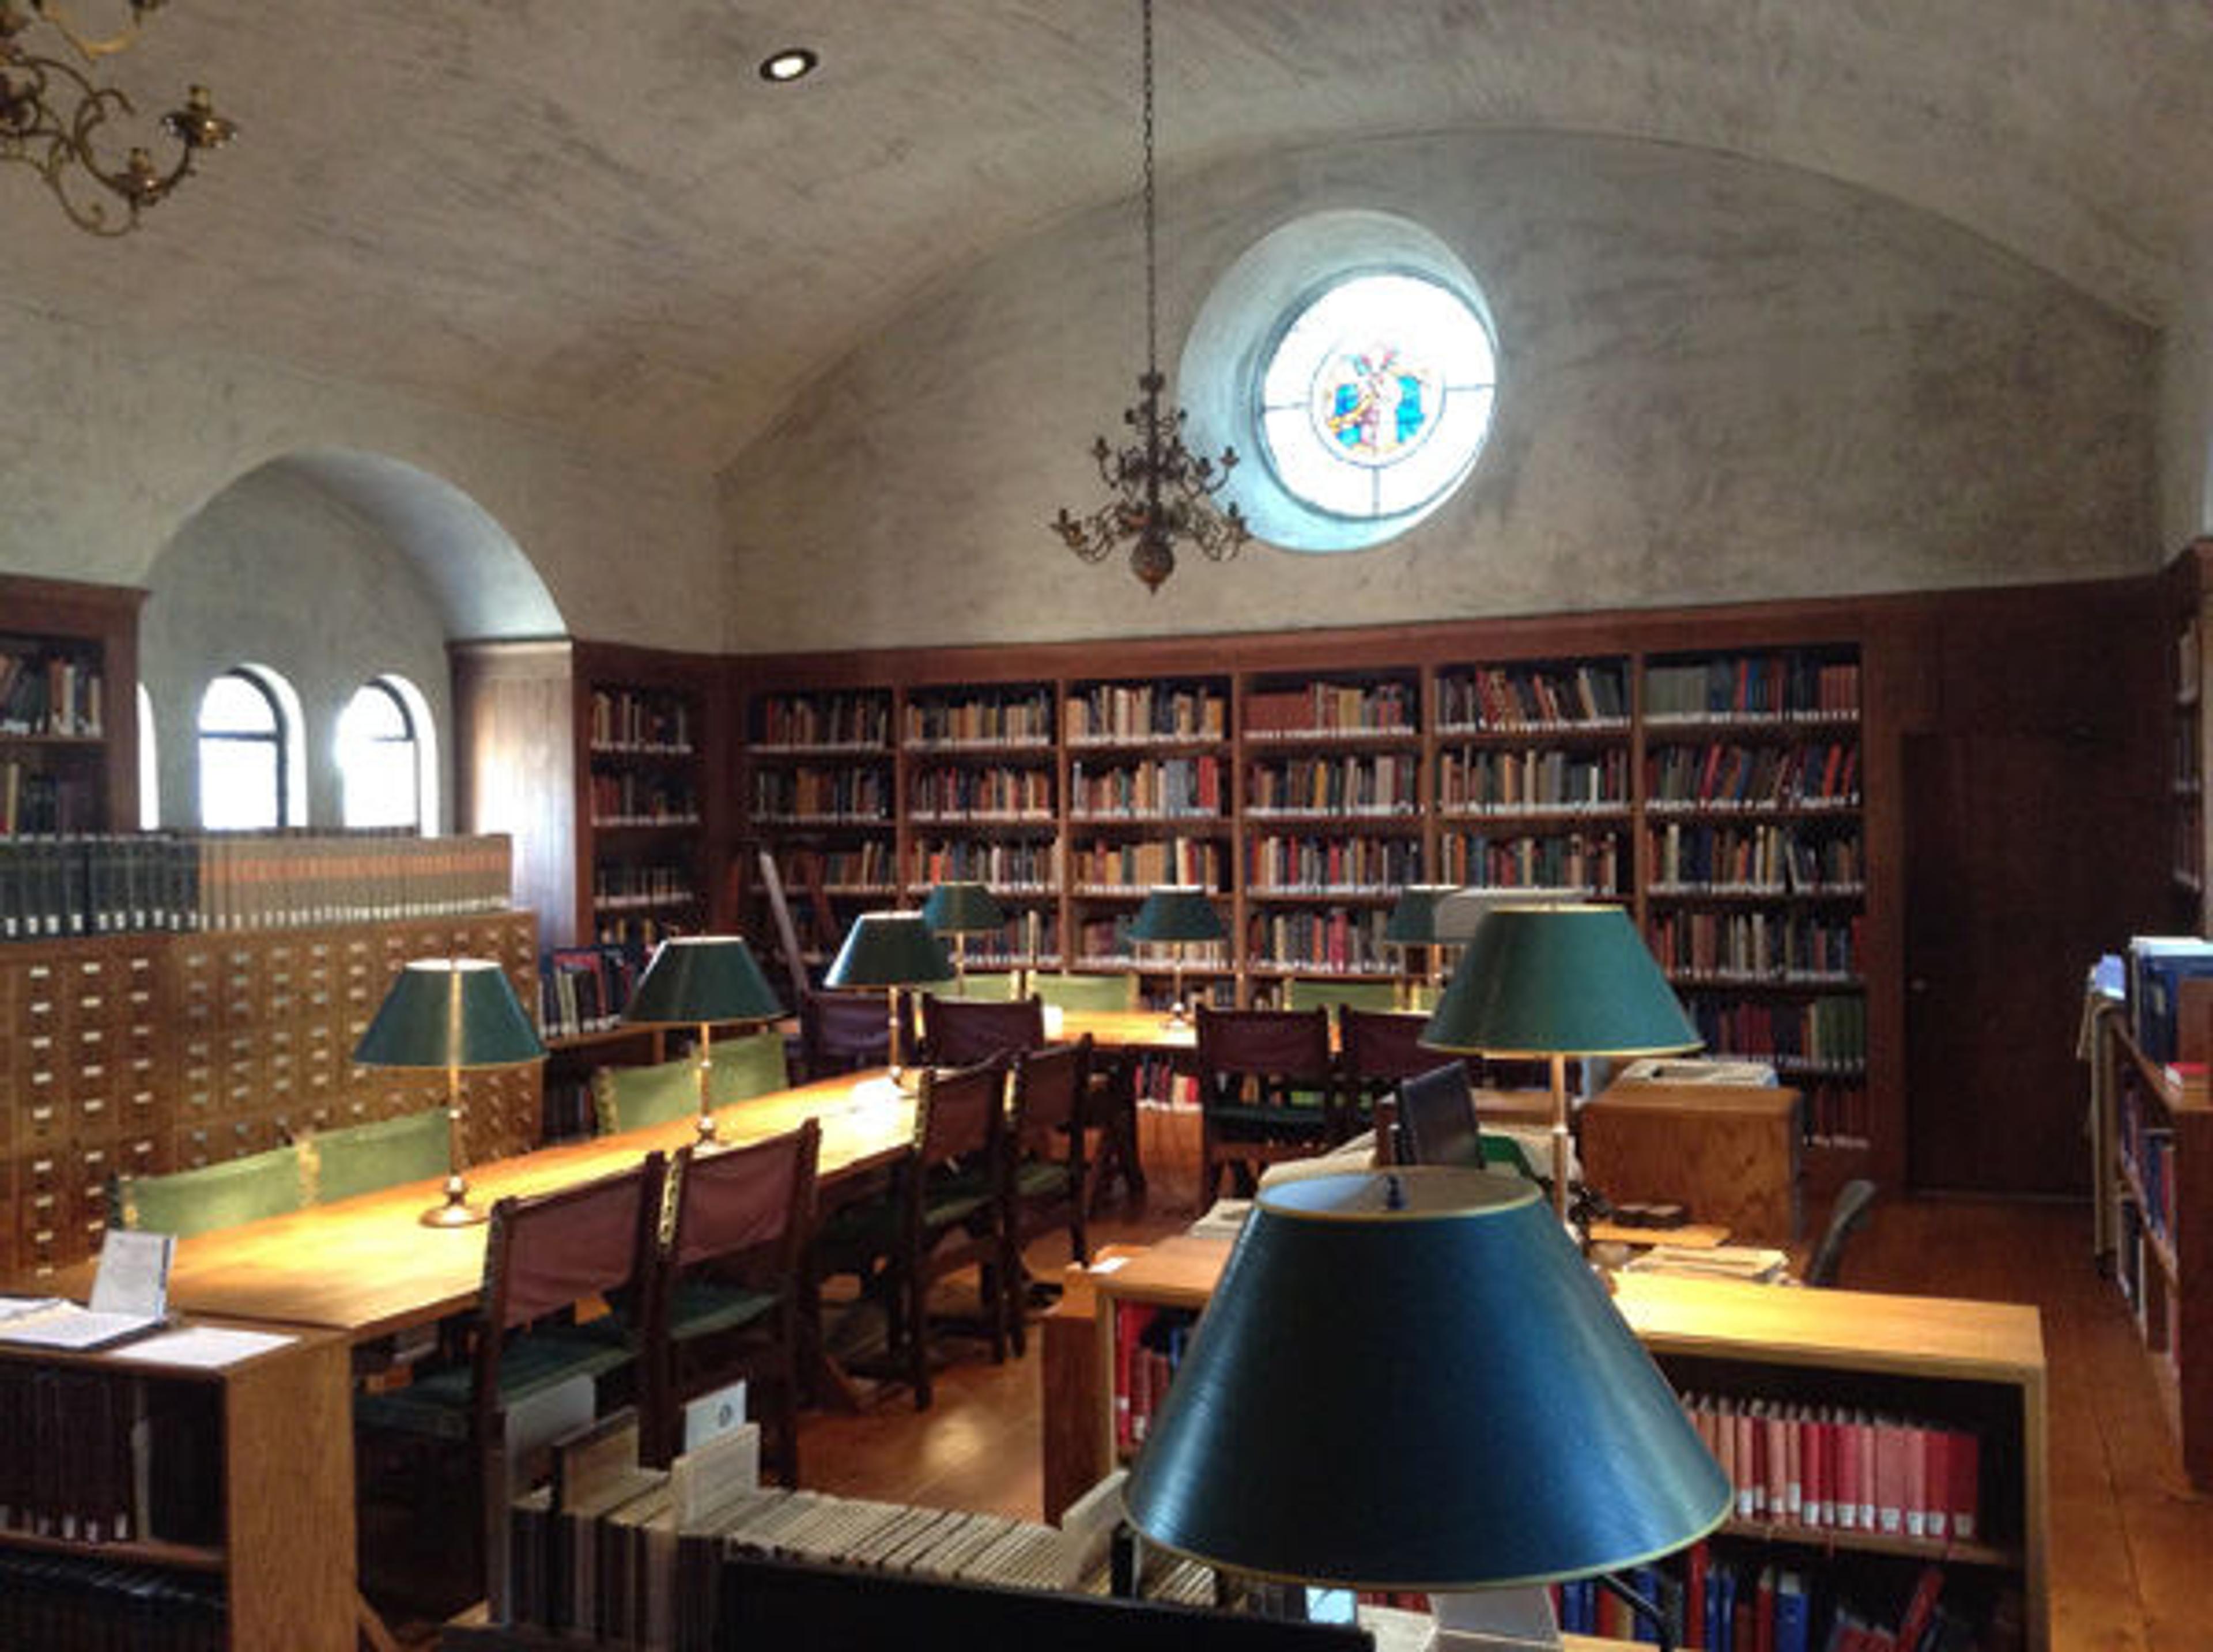 Cloisters Library in 2014